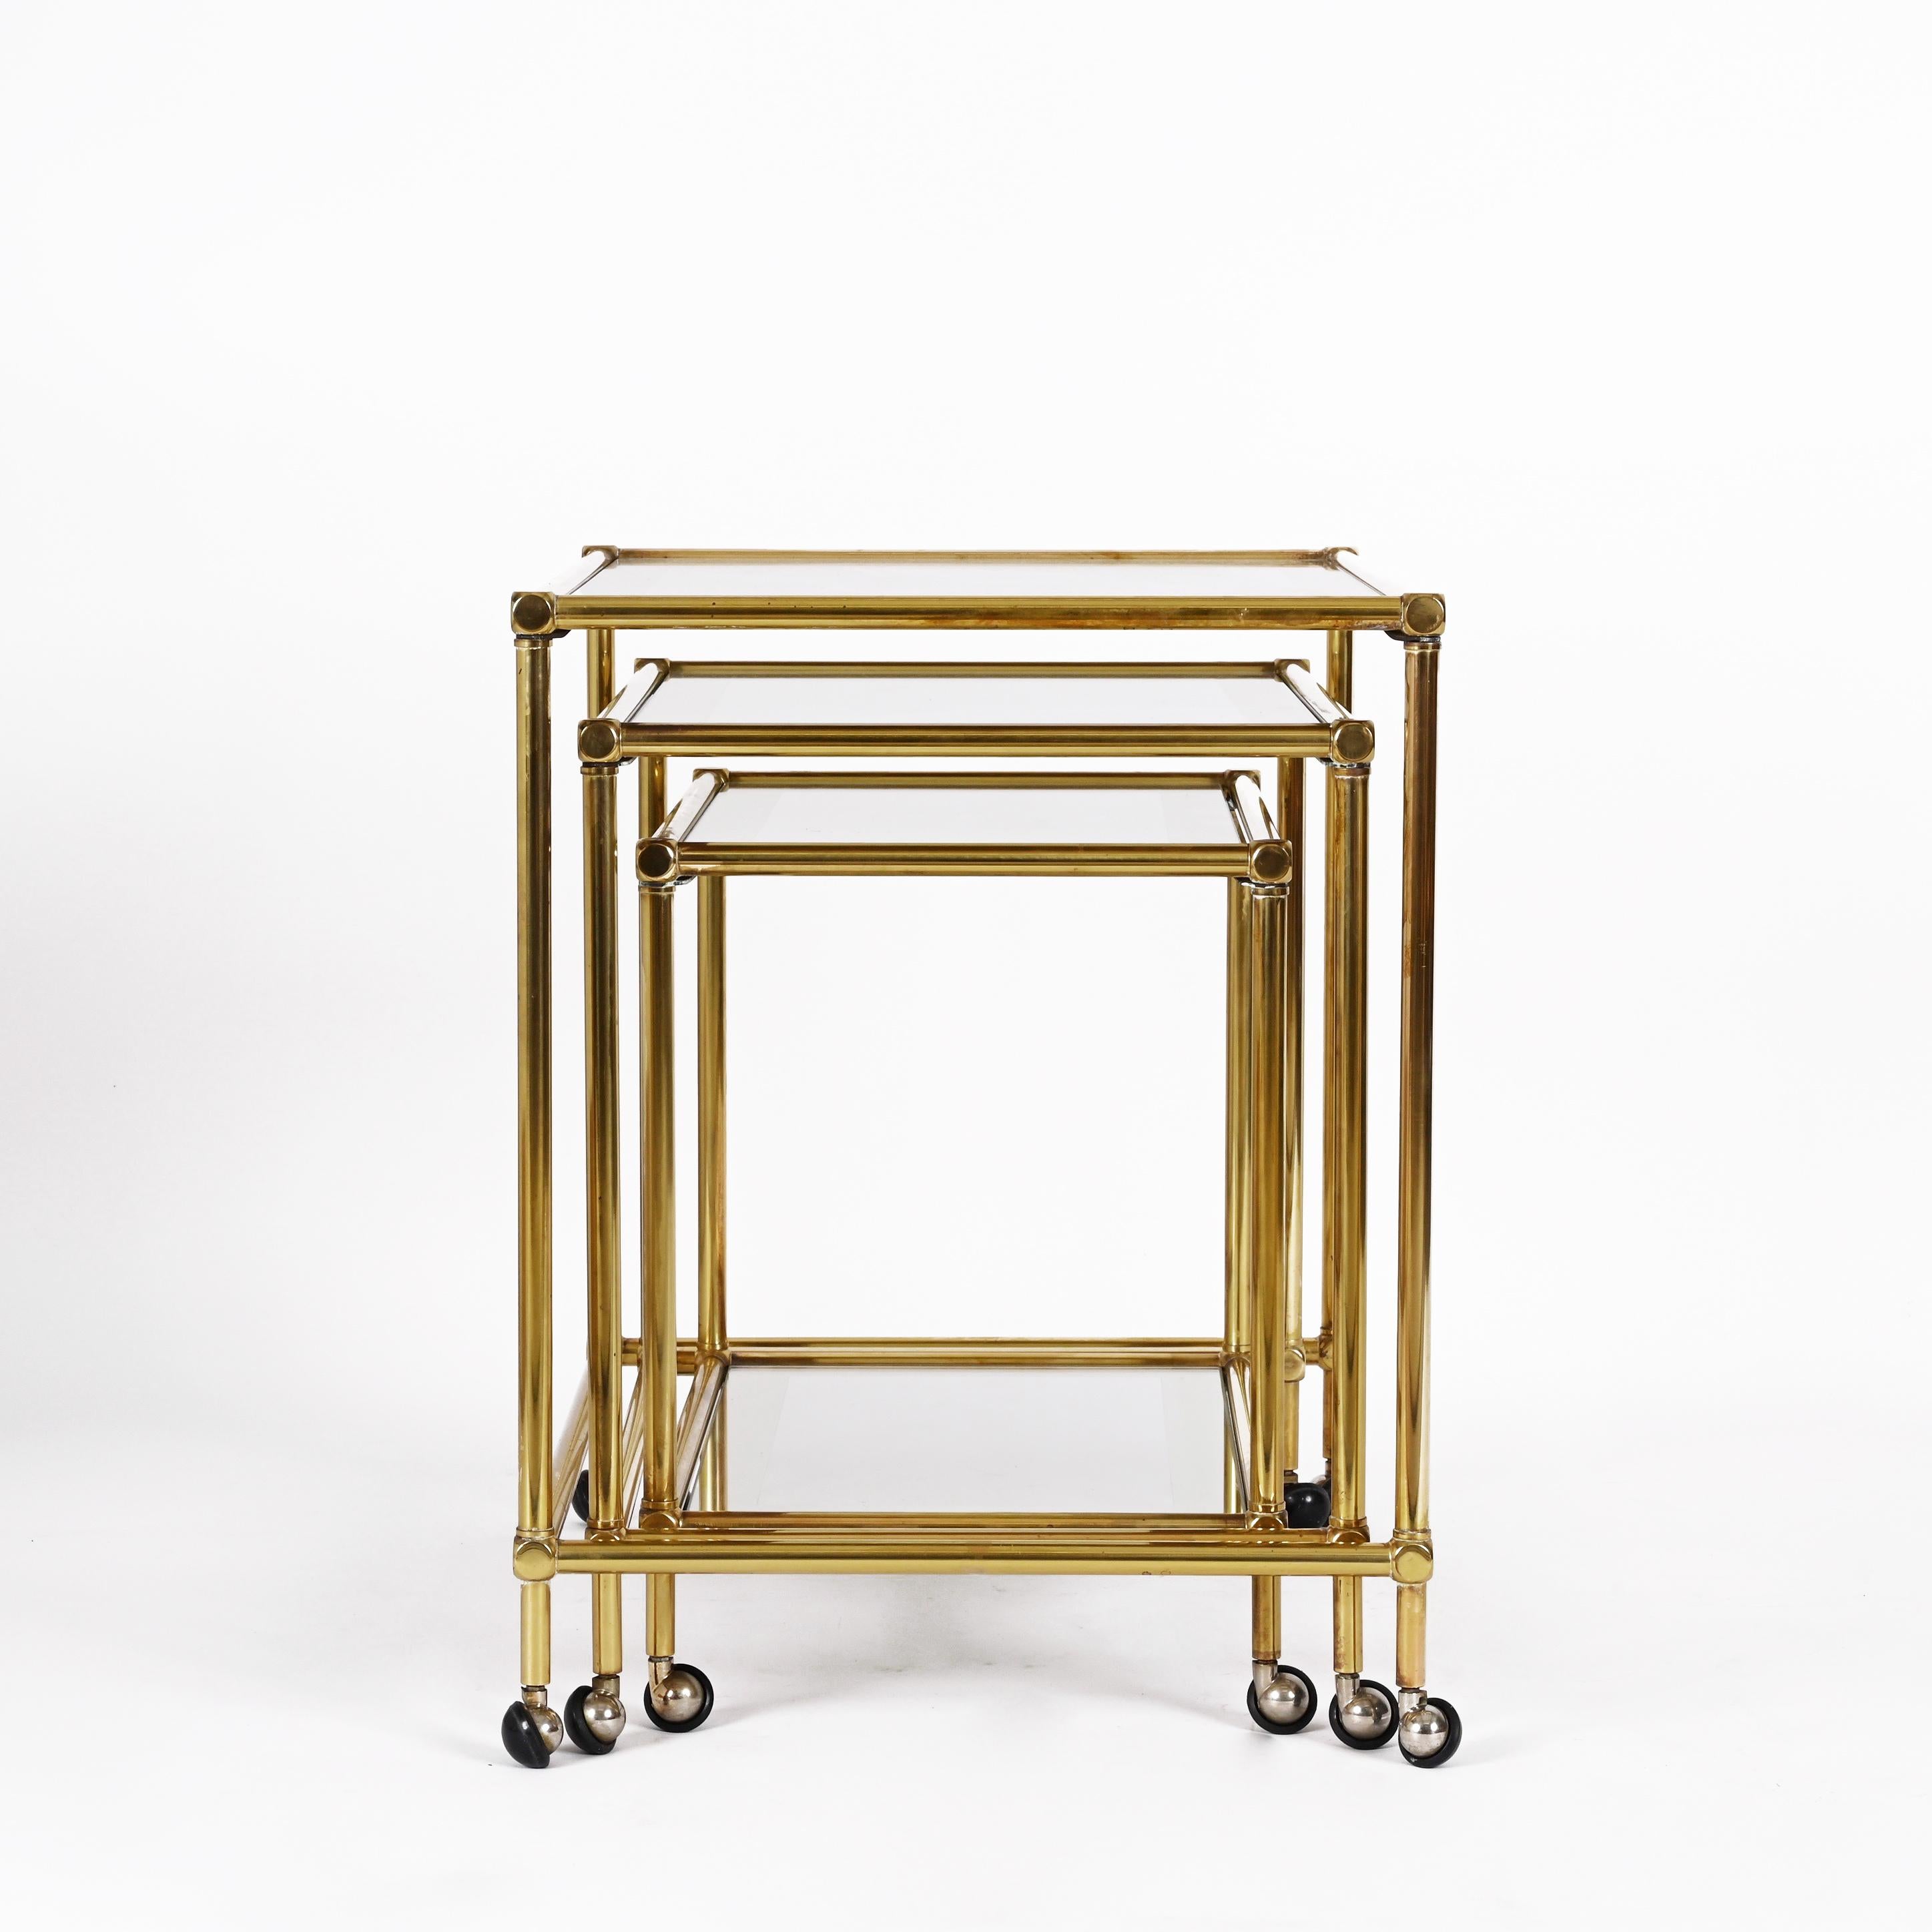 Set of Brass Mirrored Border with Glass Top Nesting Tables, Maison Jansen, 1970s For Sale 8